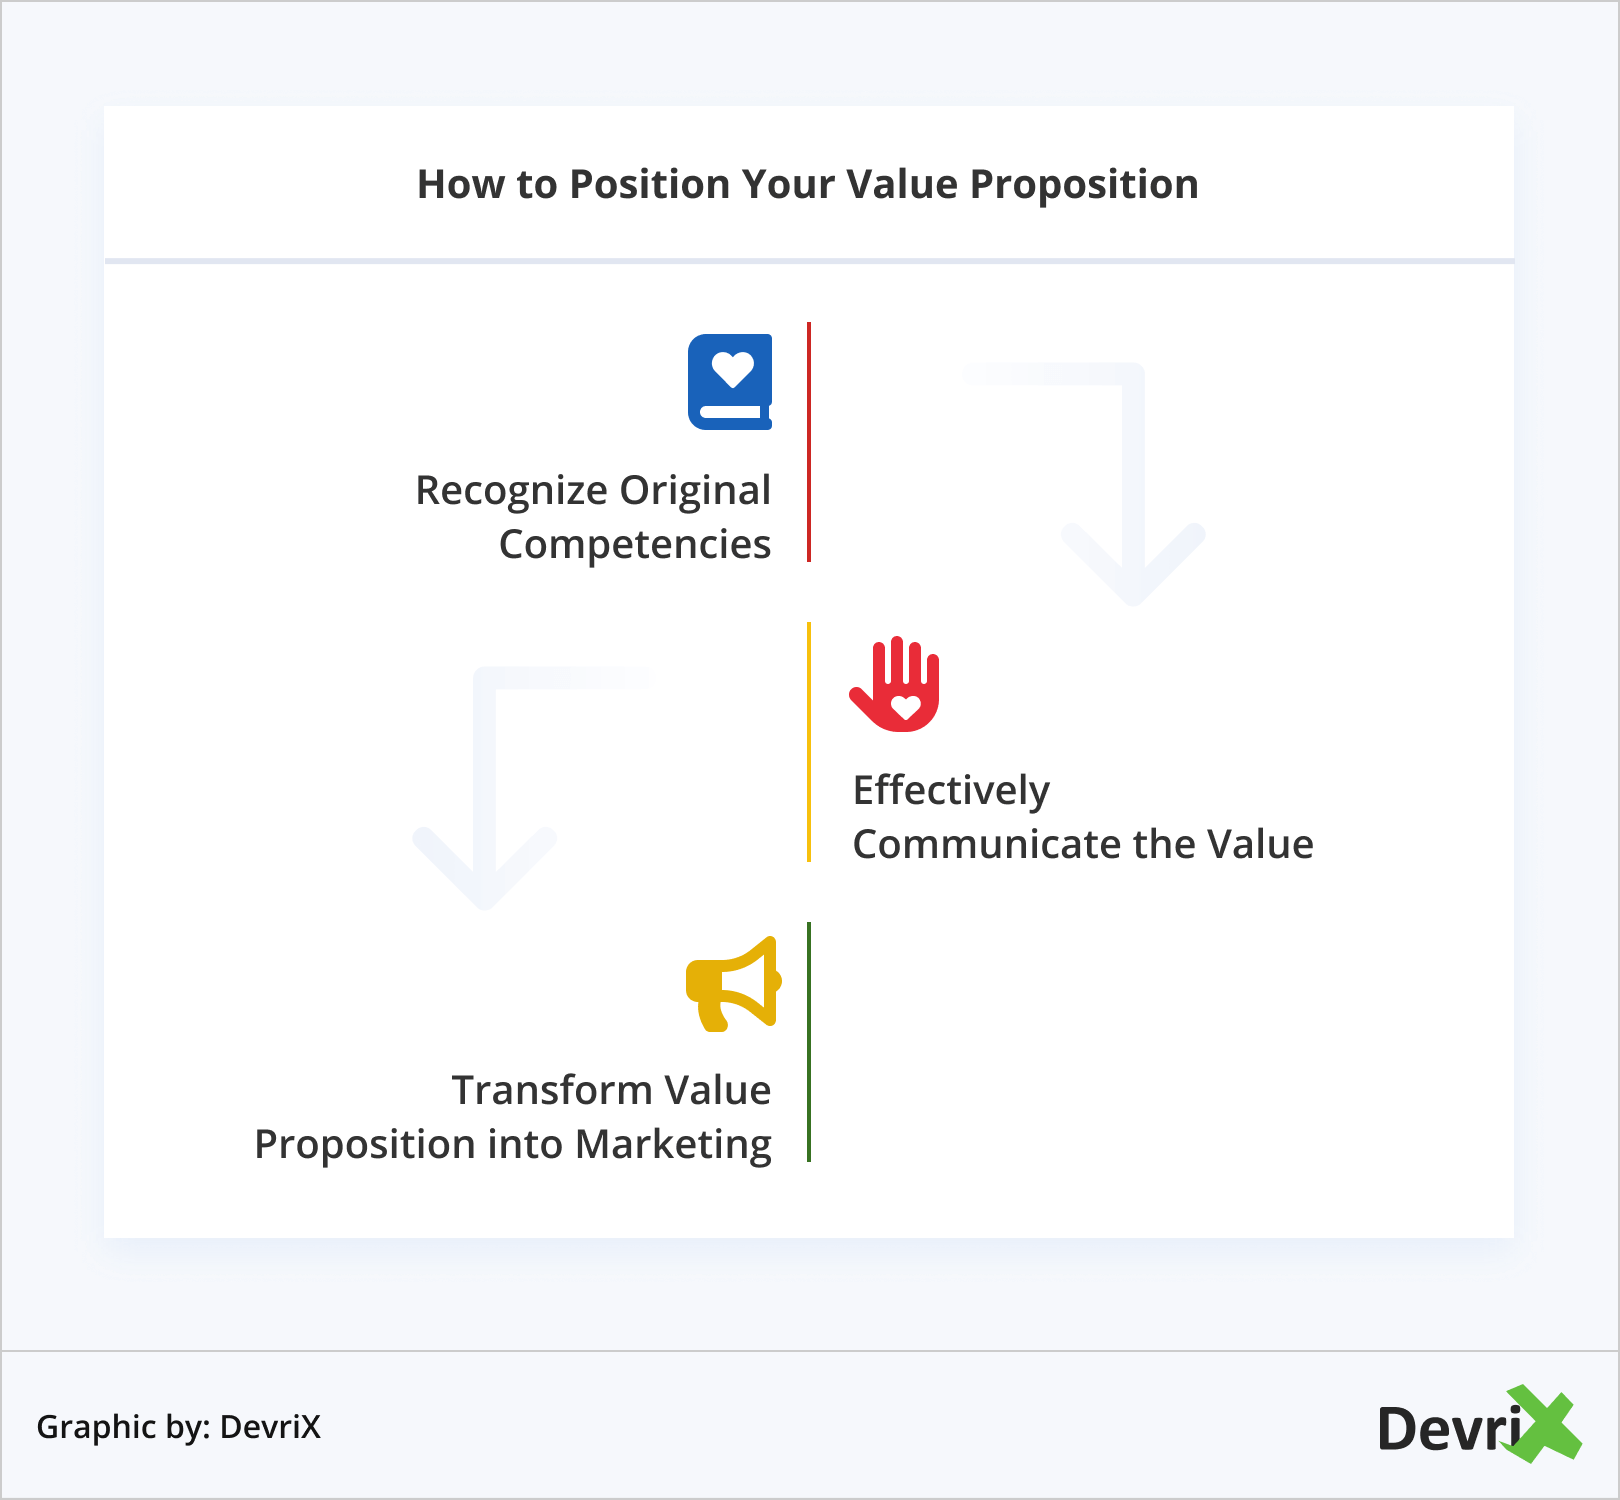 How to Position Your Value Proposition